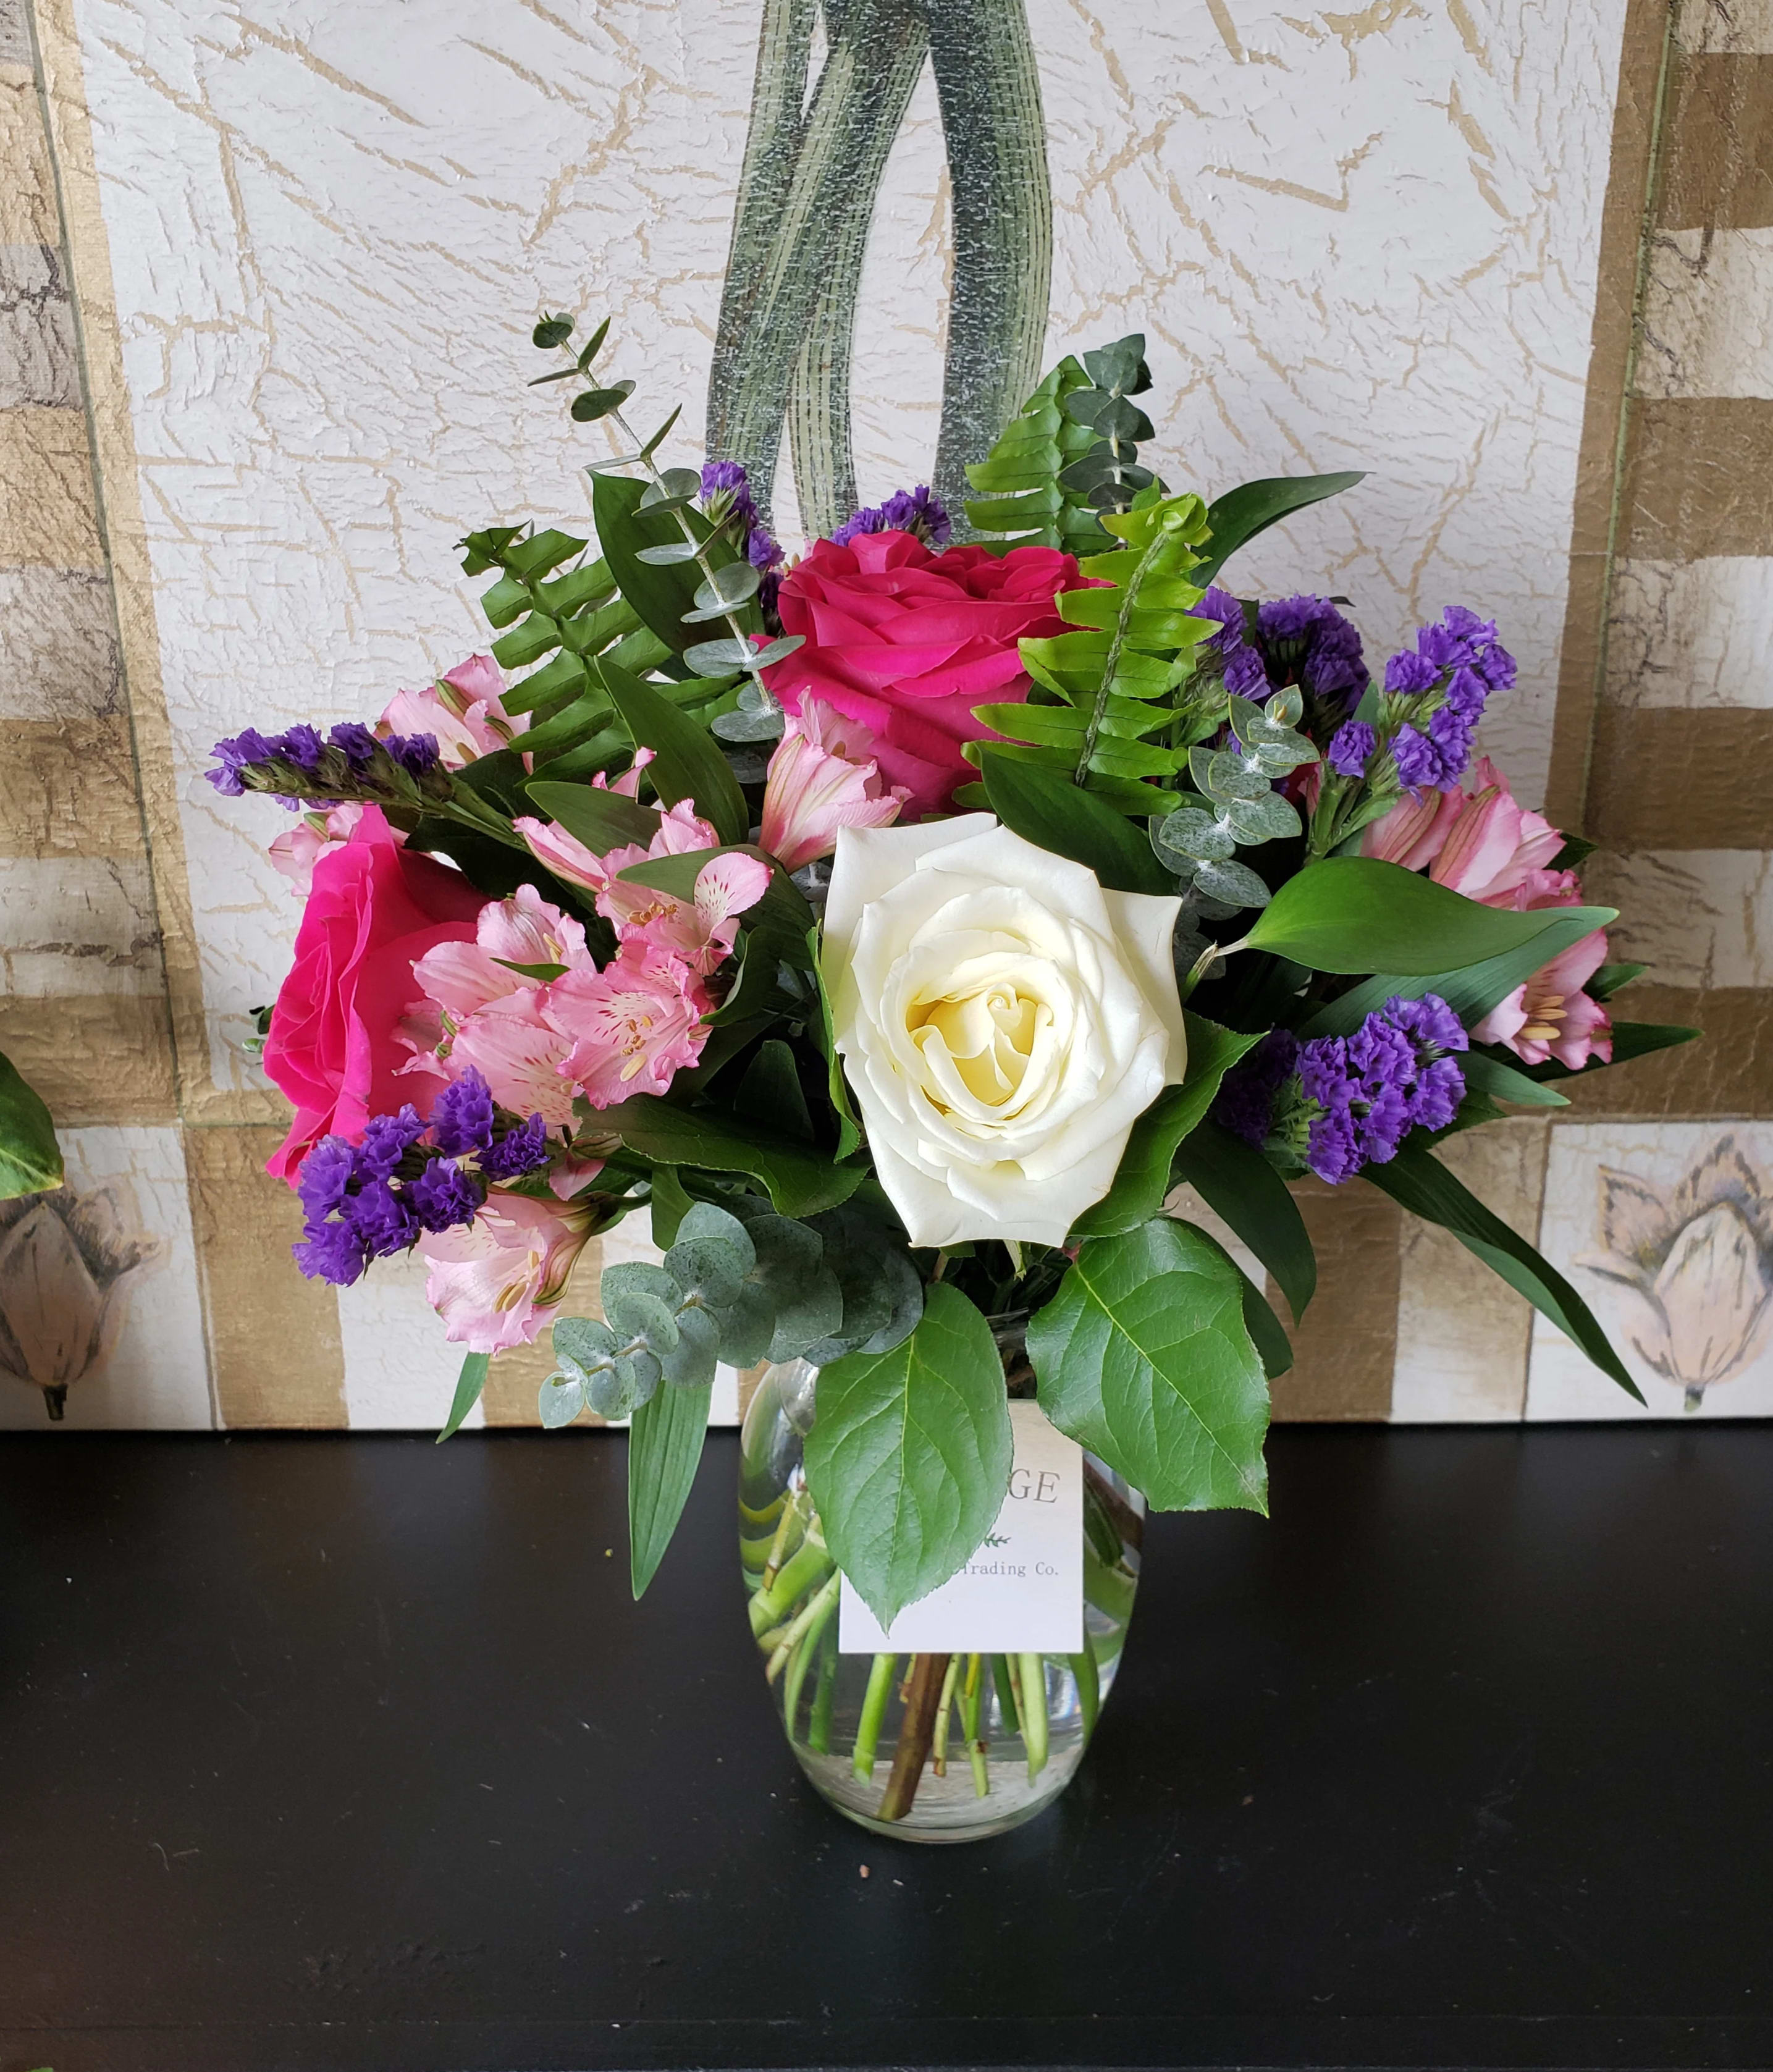 Colette - Colette is tastefully arranged in a clear glass vase. For custom orders and upgrade options, please contact our shop directly at 732-341-3723.  Lemon Leaf, Sword Fern. Israeli Ruscus, Eucalyptus, White and Hot Pink Roses, Pink Alstro and Purple Statice.